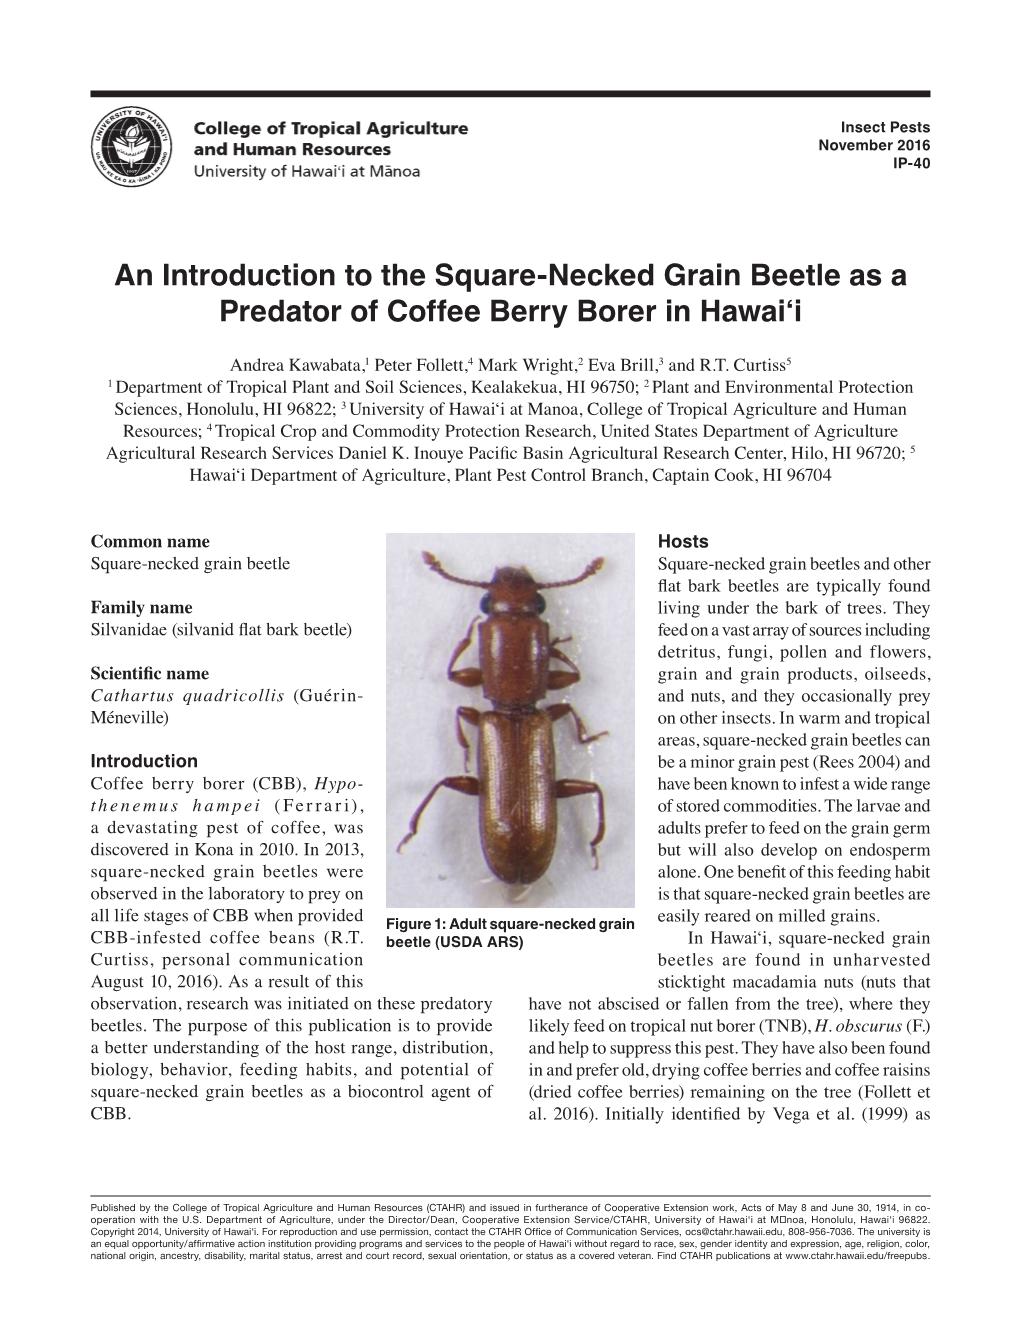 An Introduction to the Square-Necked Grain Beetle As a Predator of Coffee Berry Borer in Hawai‘I